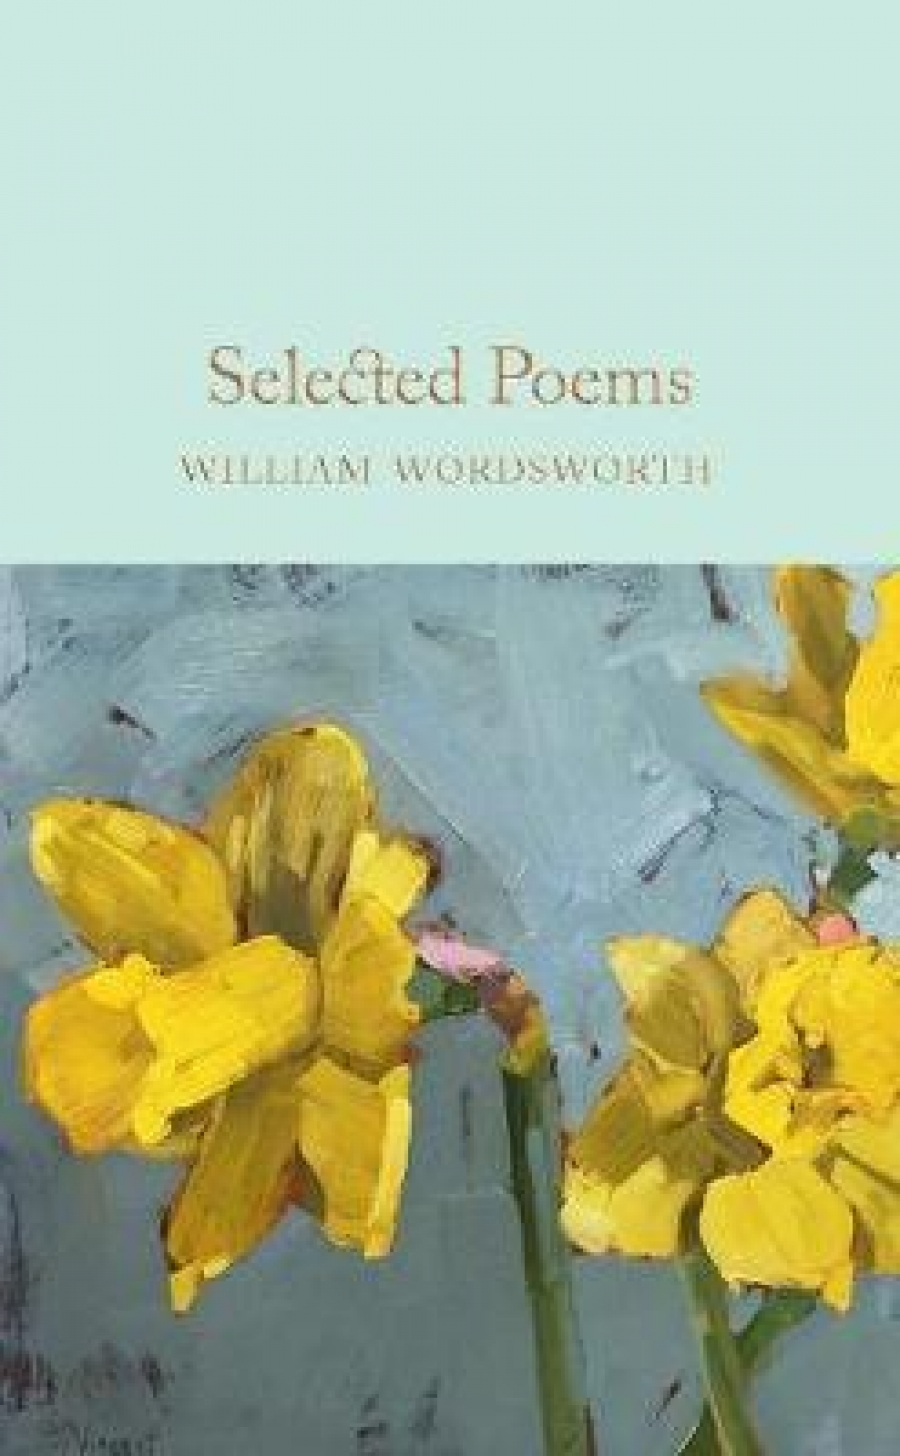 Wordsworth William Selected Poems 